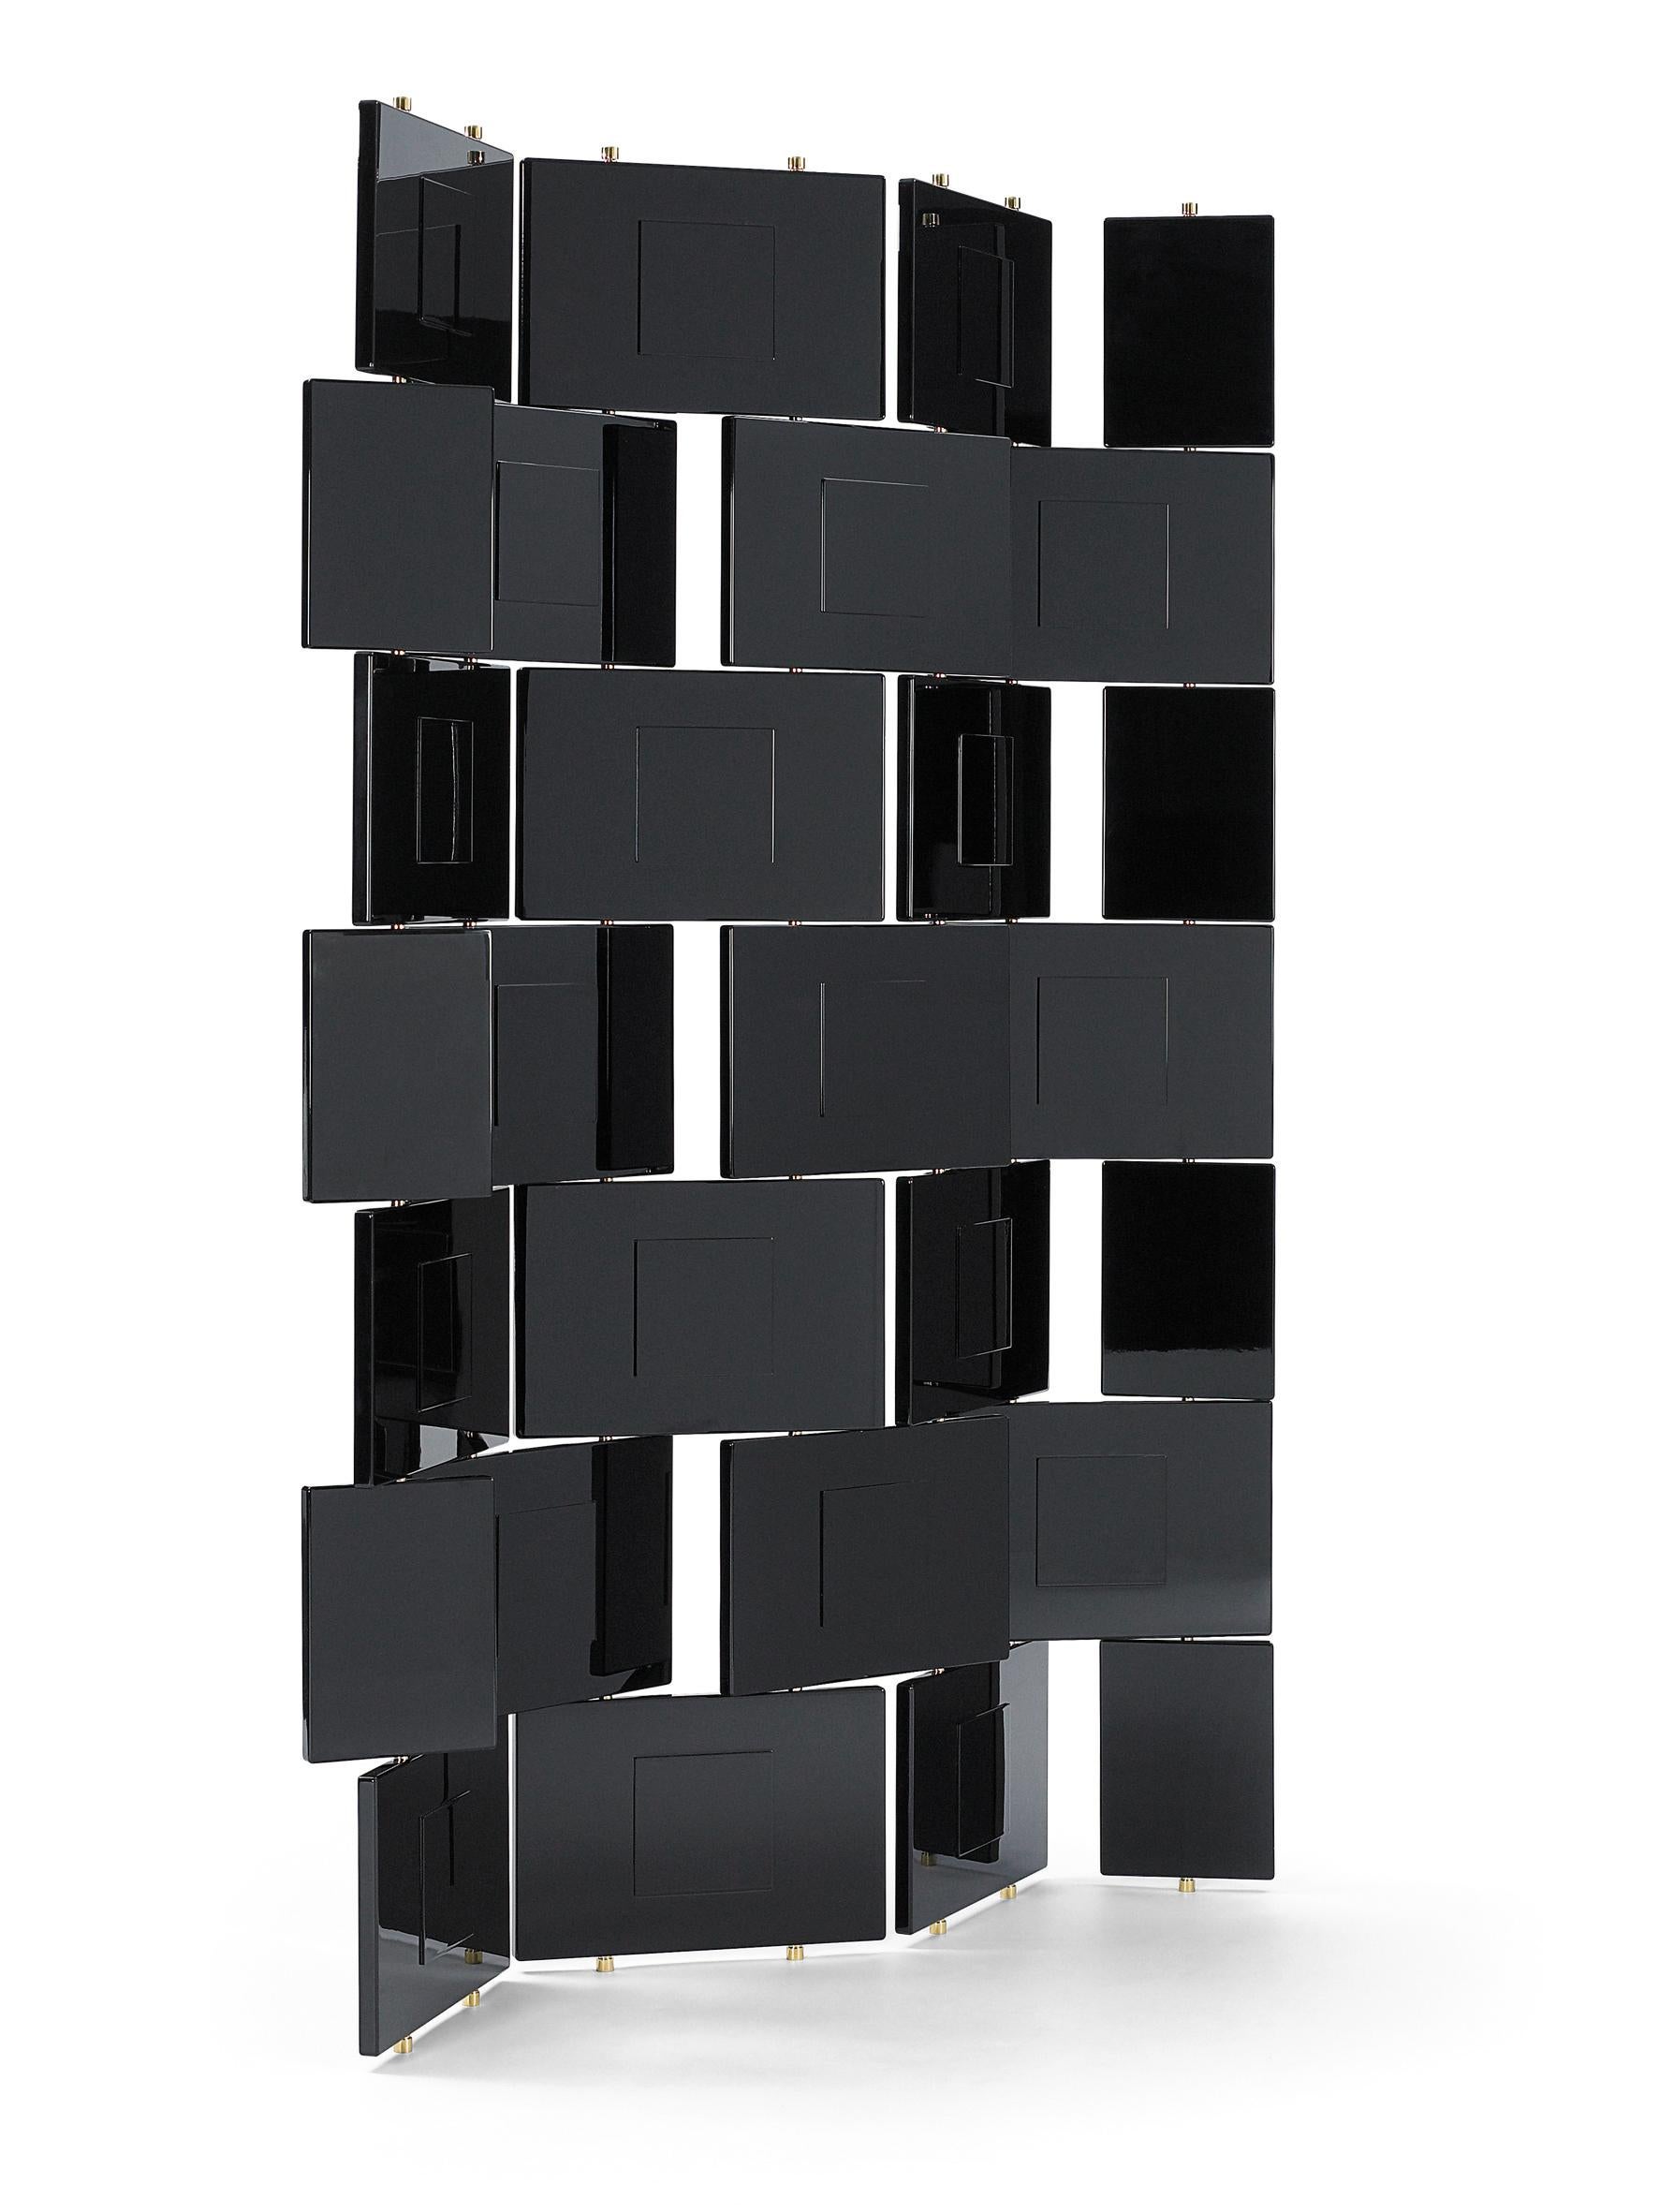 Eileen Gray was fascinated by the beauty of traditional lacquer ware. She learned the centuries-old craft from a Japanese artisan and then perfected her skills over the course of many years. Brick Screen is one of her best-known creations. She